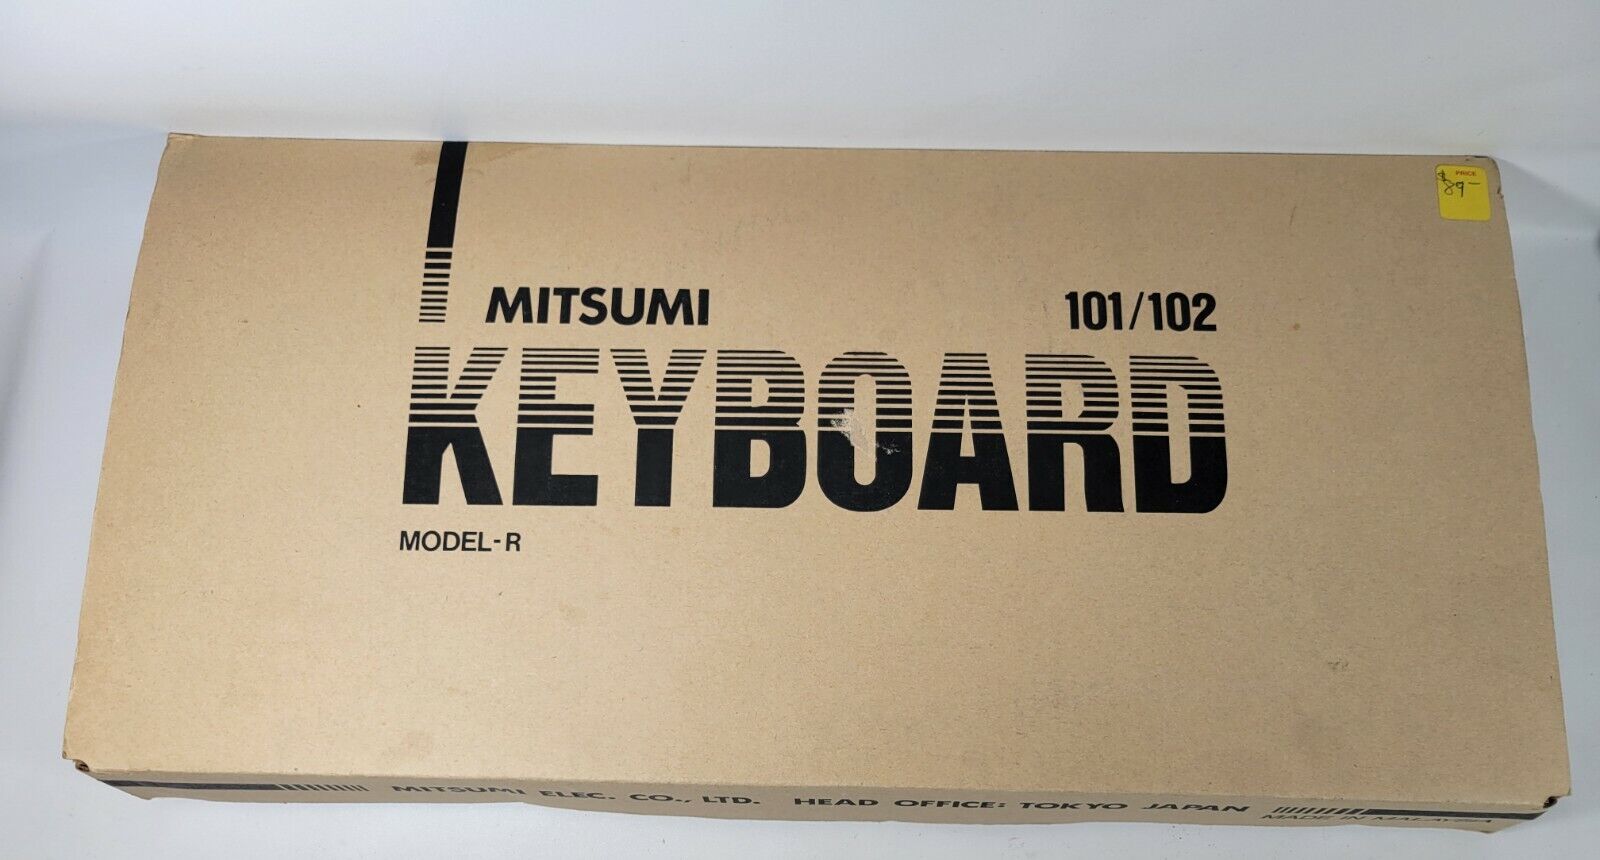 VTG Mitsumi AT or XT Switchable Keyboard Model KPQ-E99YC 5 Pin Connector CLICKY 